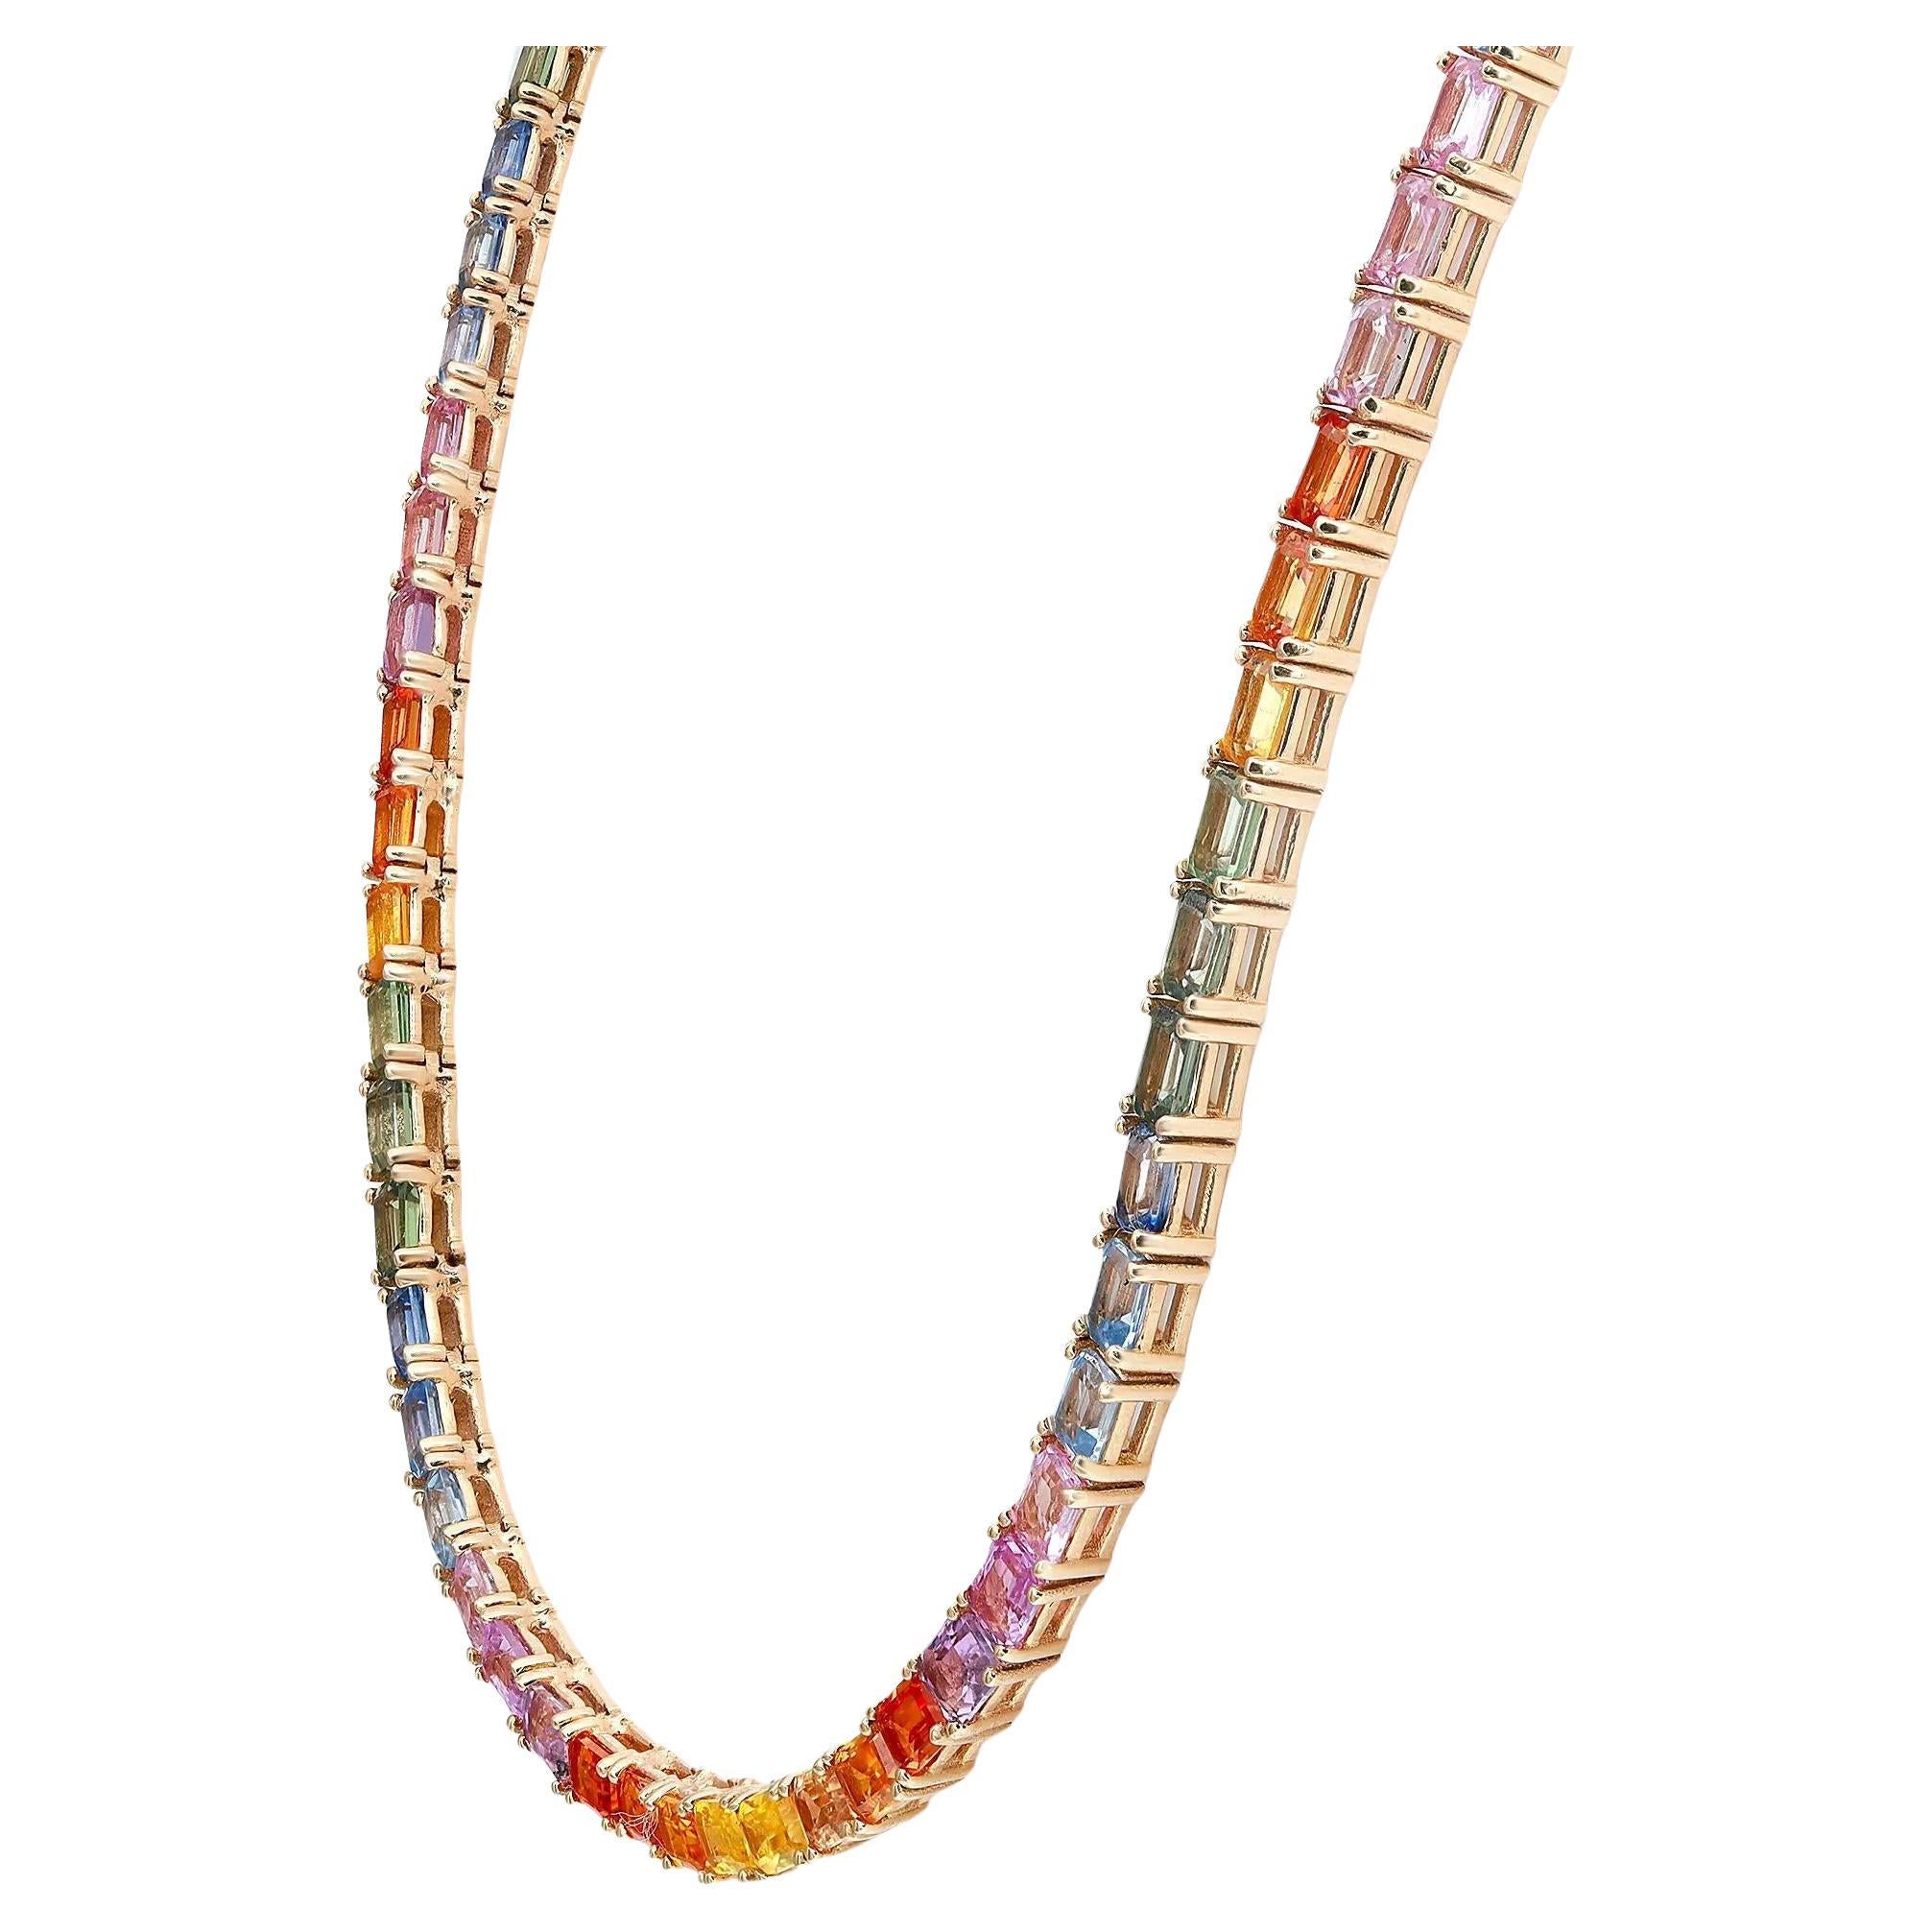 A classic yet vibrant rainbow tennis necklace blazing with the brilliance of 101 emerald cut natural multi-colored sapphires with a total weight of 26.12 carats. Crafted in 14k yellow gold in four prong setting. Necklace length: 17.5 inches. Width: